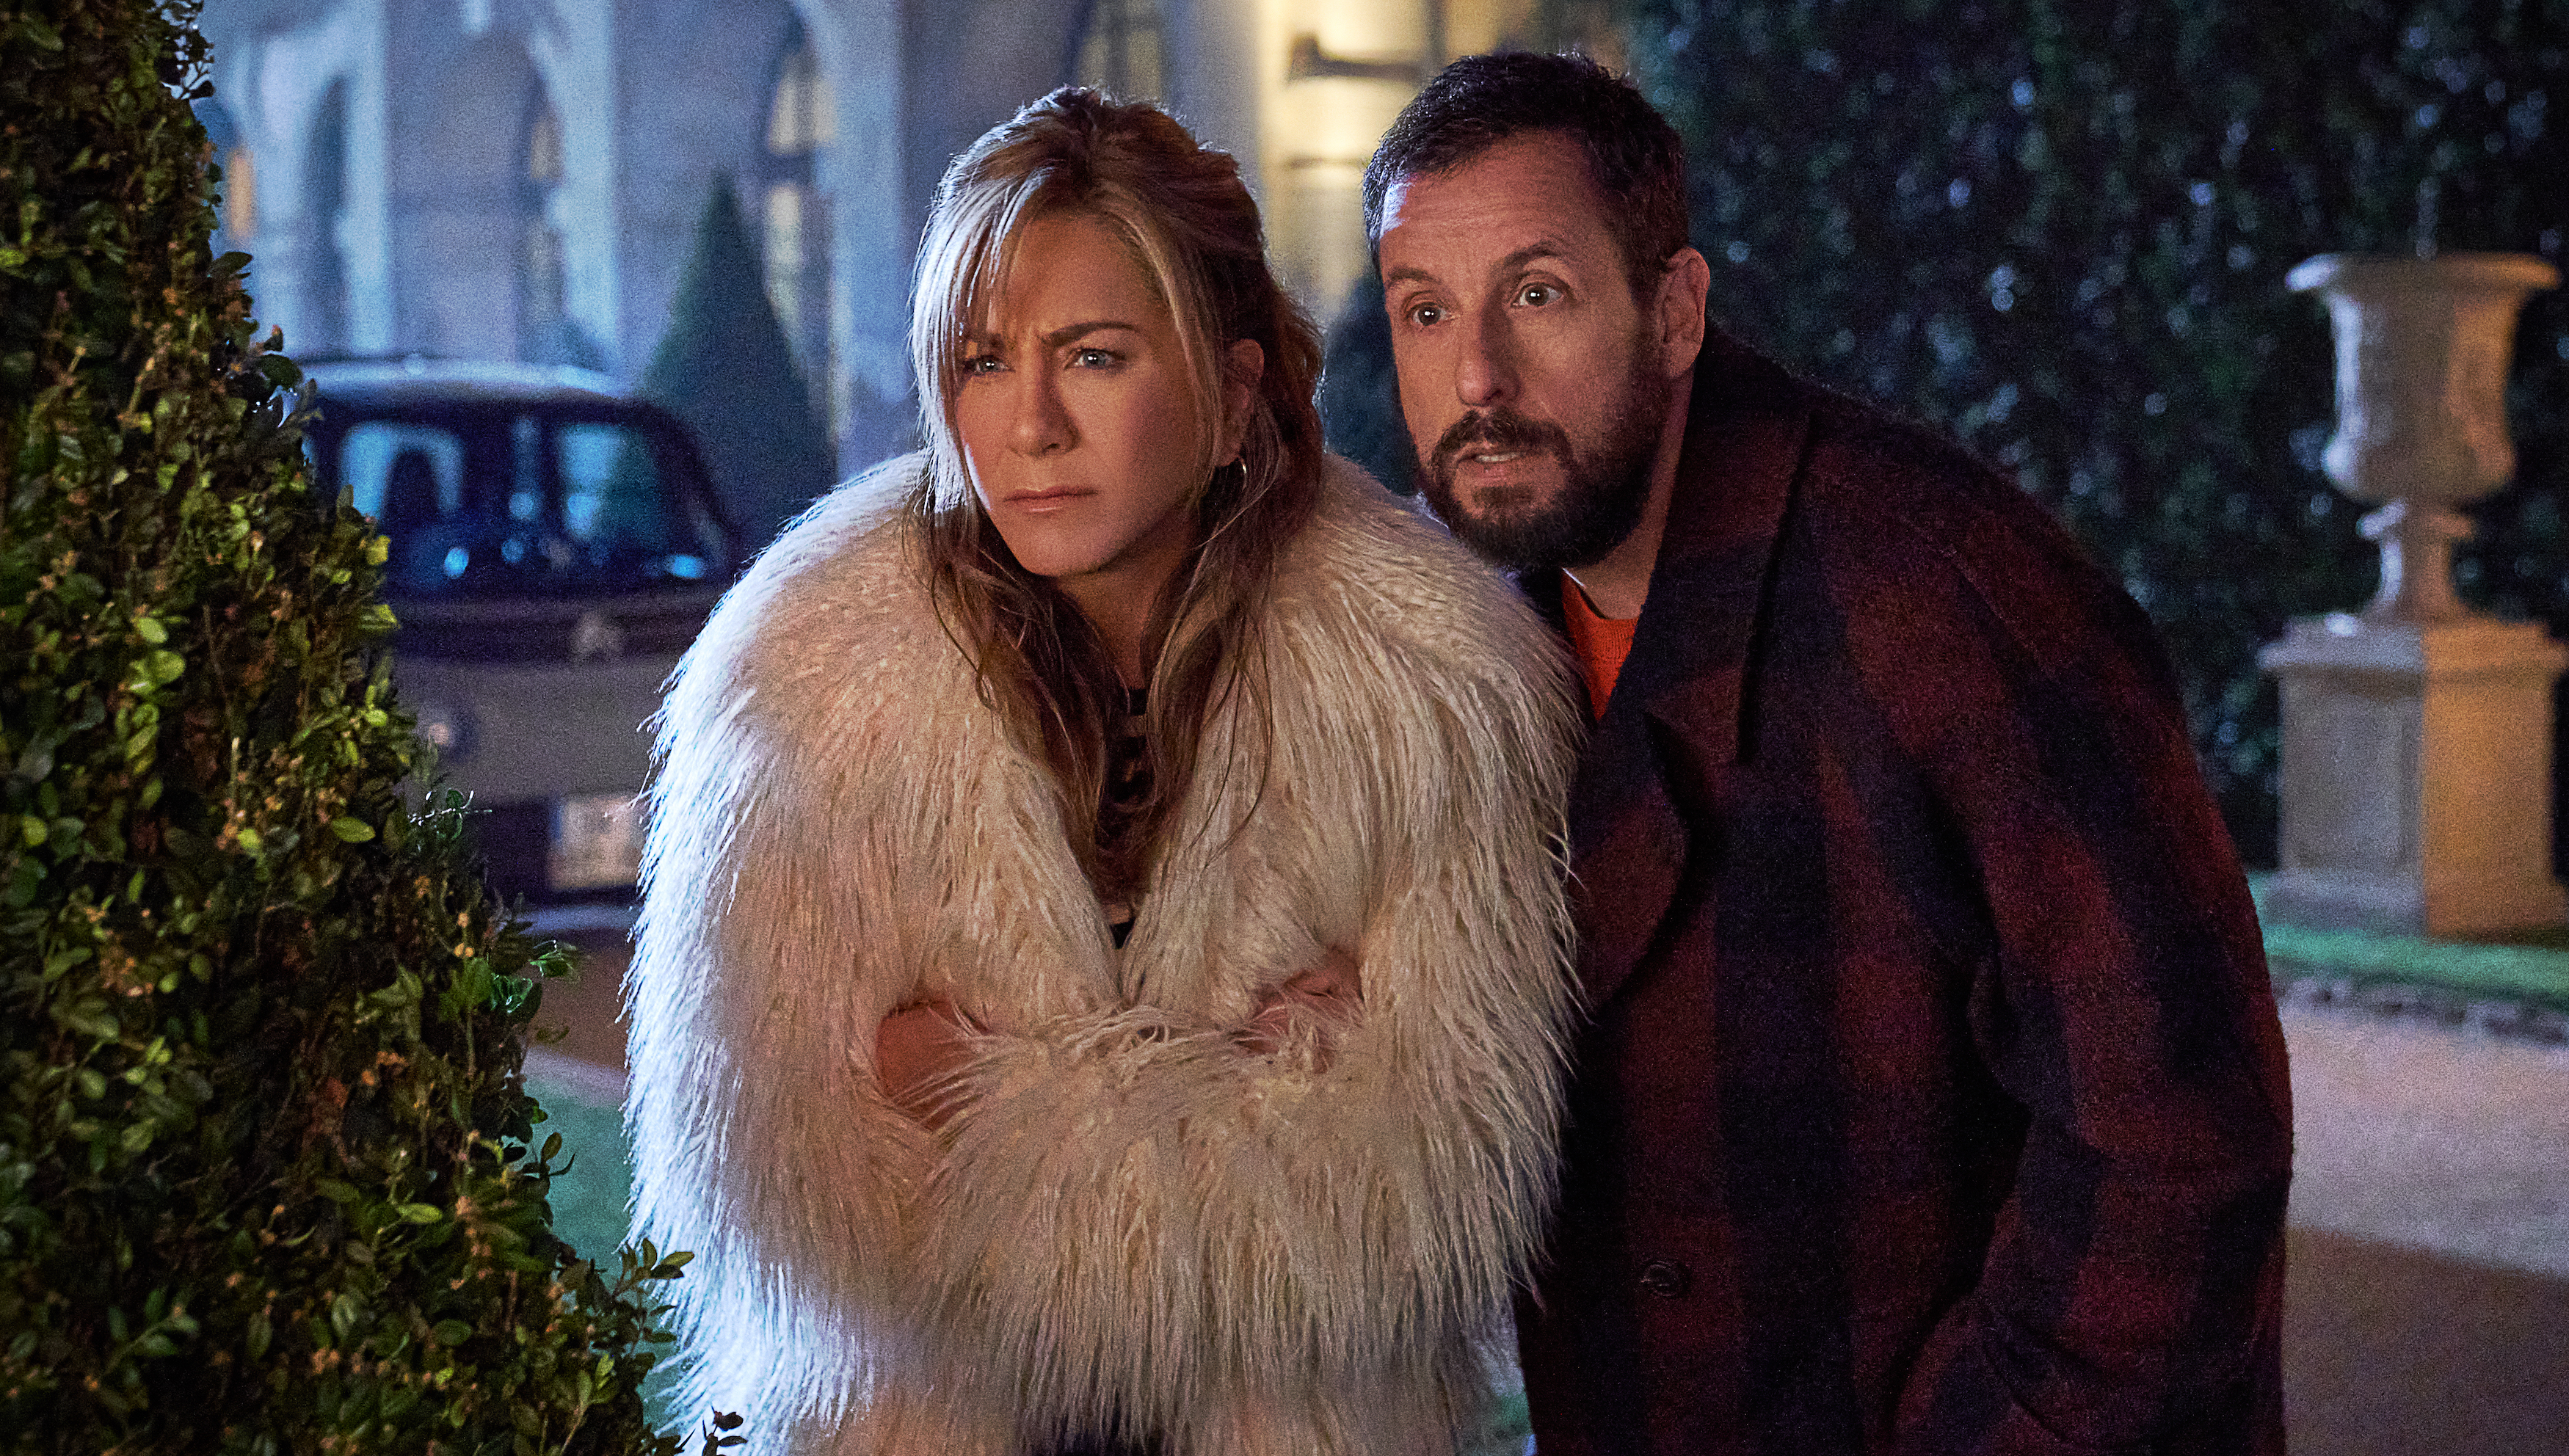 Audrey (Jennifer Aniston, in a giant fluffy white fur coat) glares and her husband Nick (Adam Sandler) boggles at something offscreen in a night shot in Netflix’s Murder Mystery 2